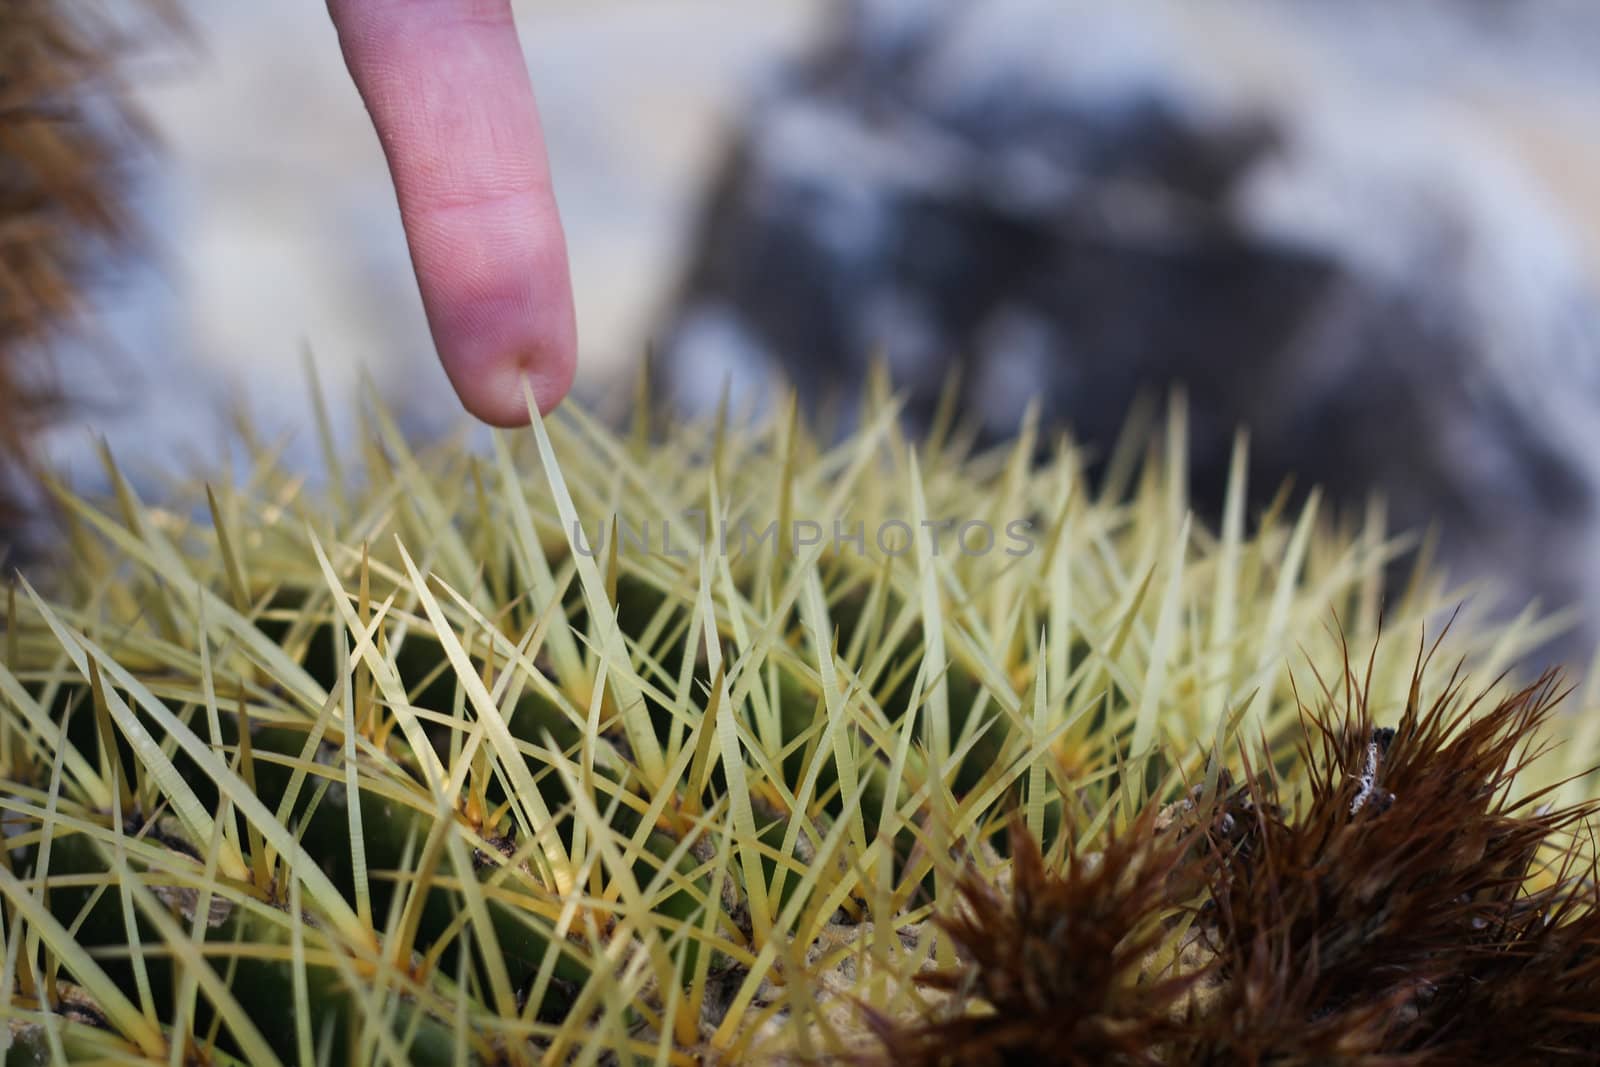 �Finger getting pricked by a cactus thorn